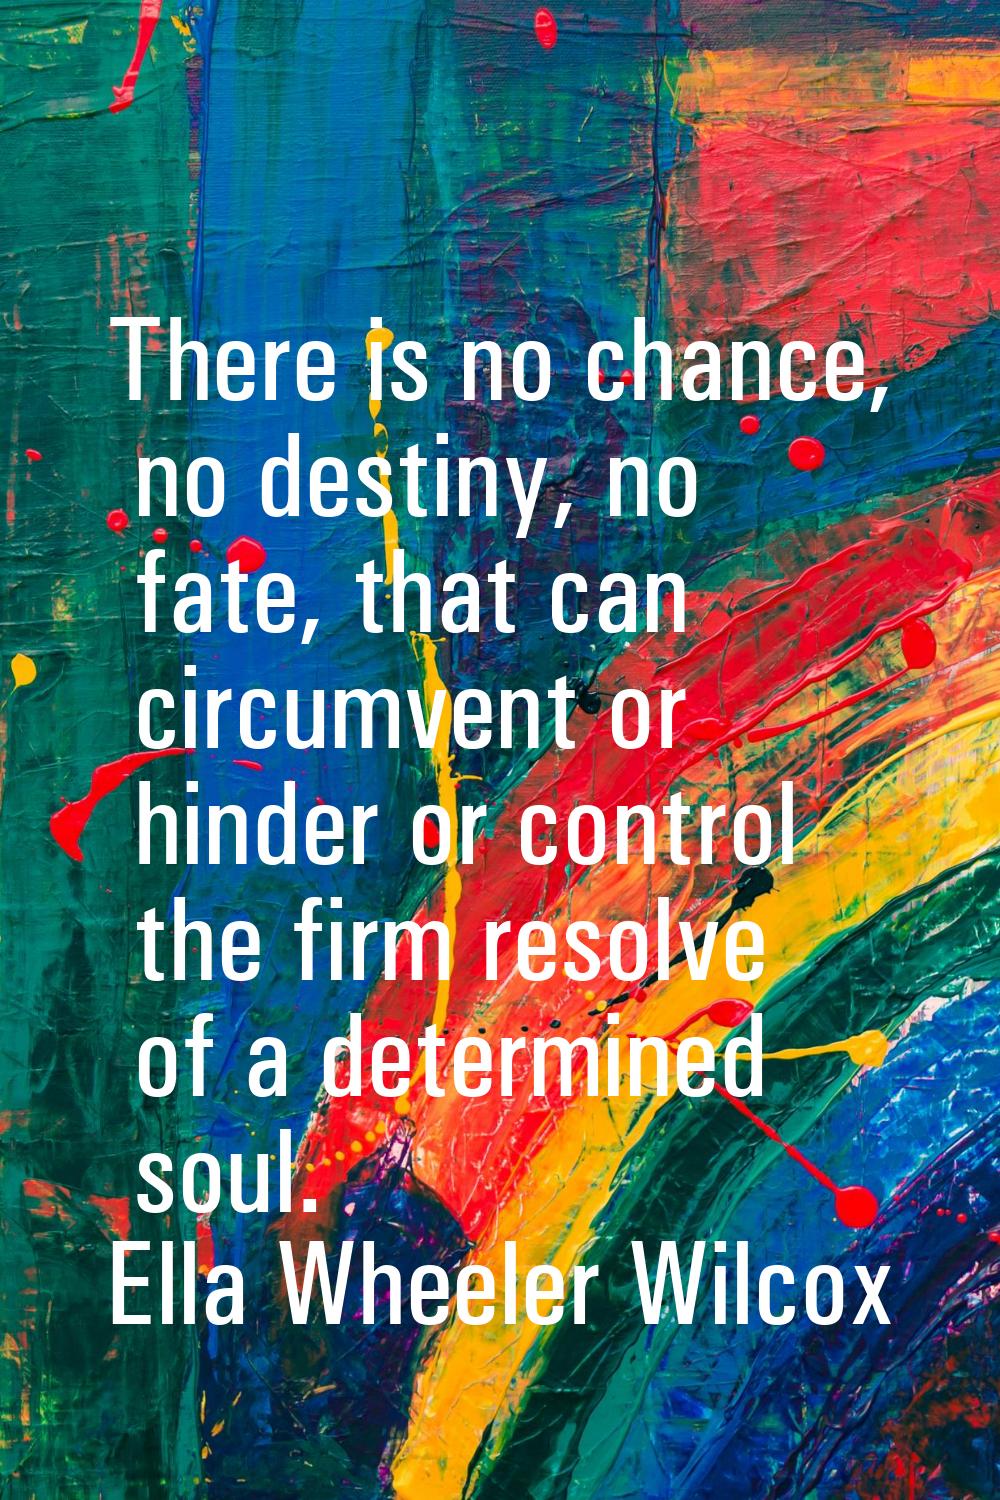 There is no chance, no destiny, no fate, that can circumvent or hinder or control the firm resolve 